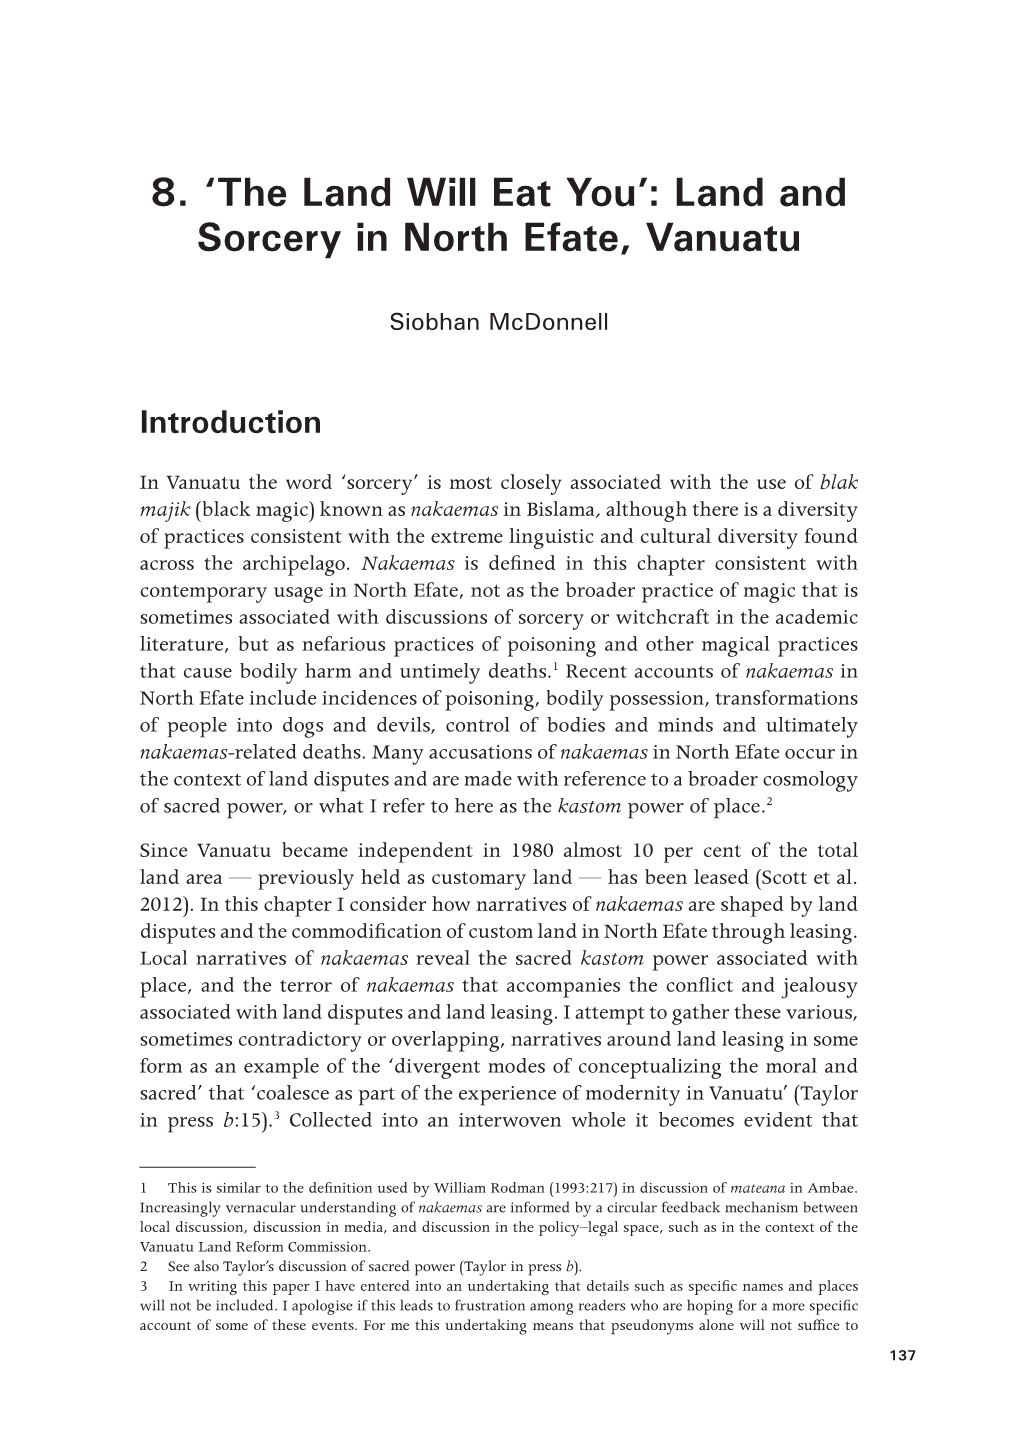 8. 'The Land Will Eat You': Land and Sorcery in North Efate, Vanuatu